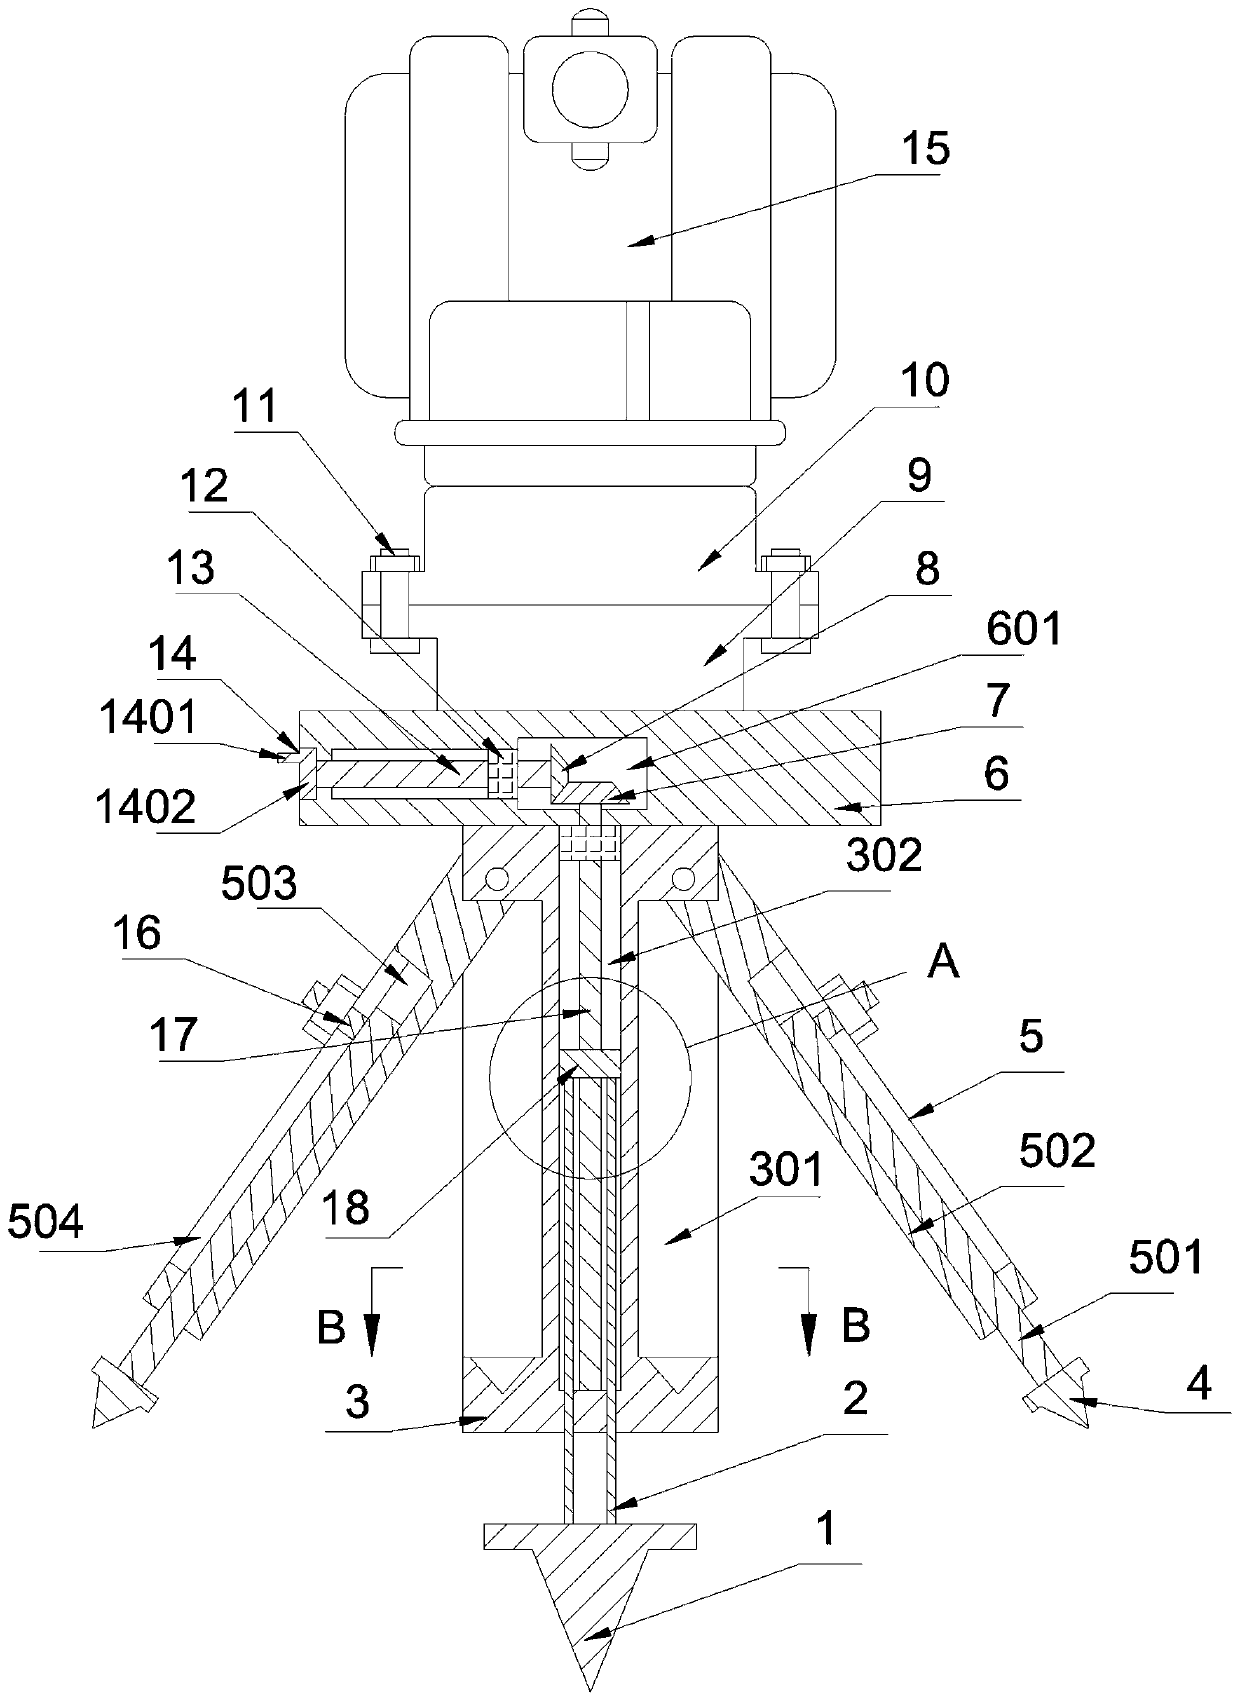 Balancing and stabilizing mechanism for geological surveying and mapping instrument